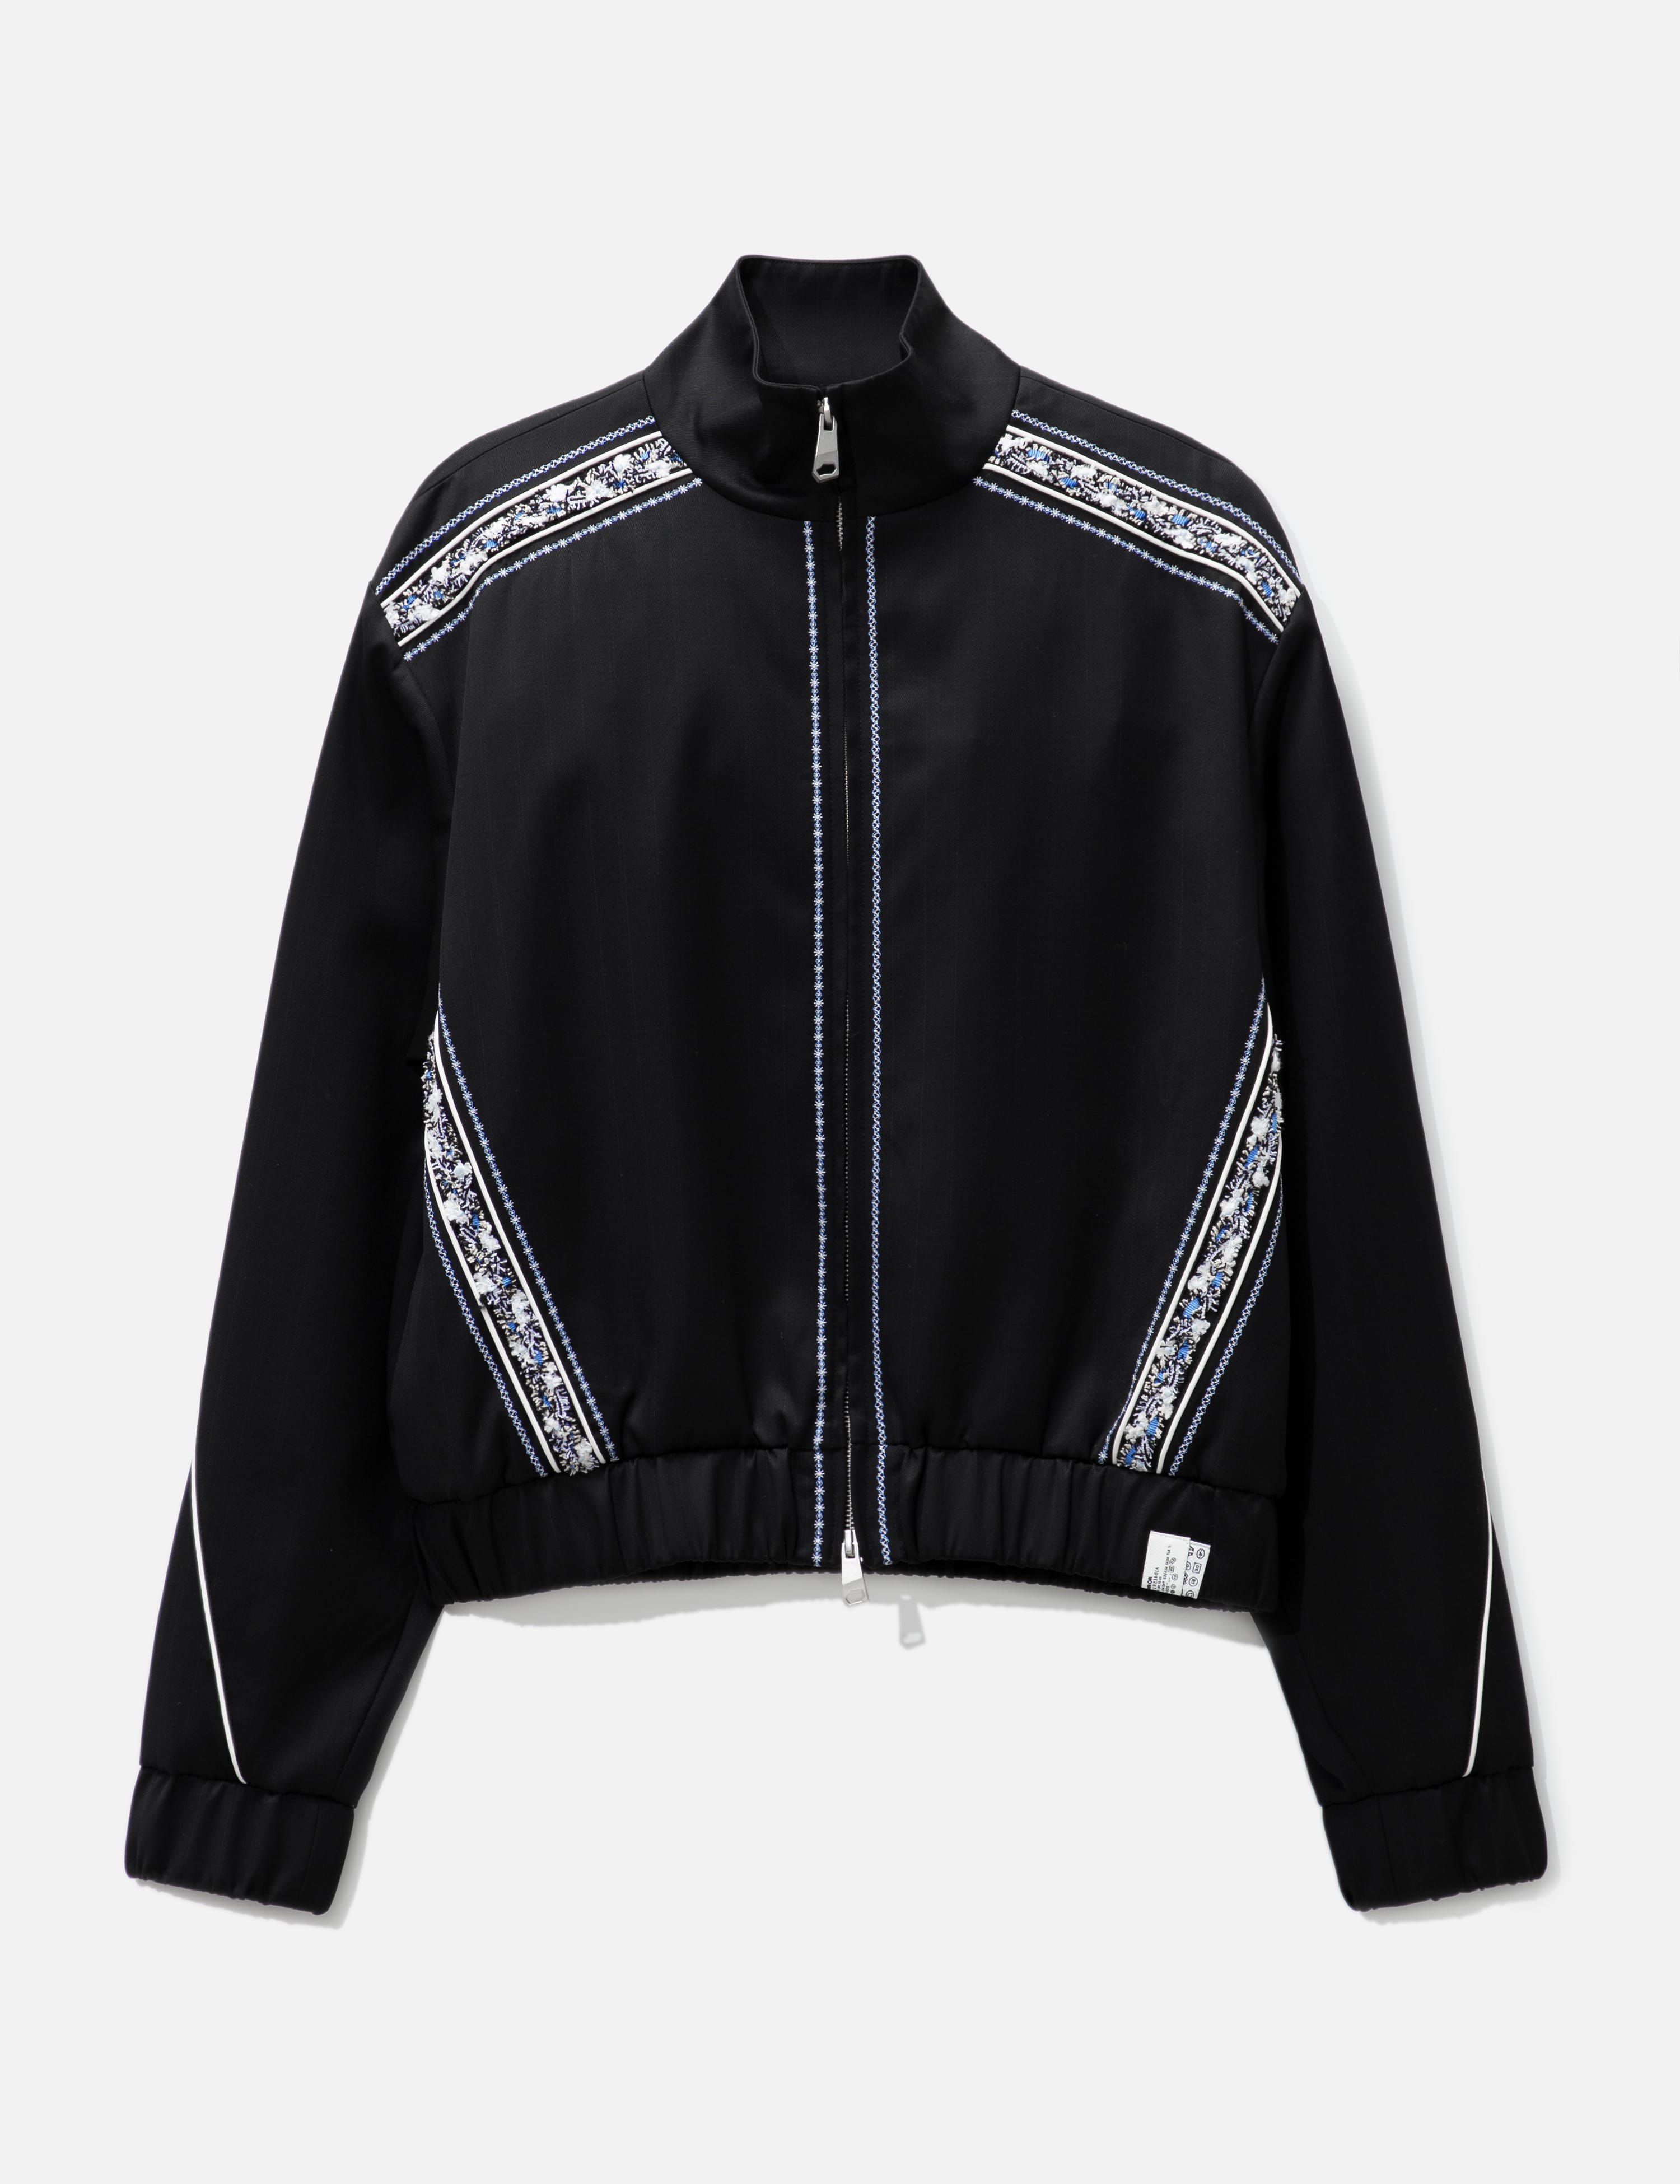 Stüssy - Cord Work Jacket | HBX - Globally Curated Fashion and